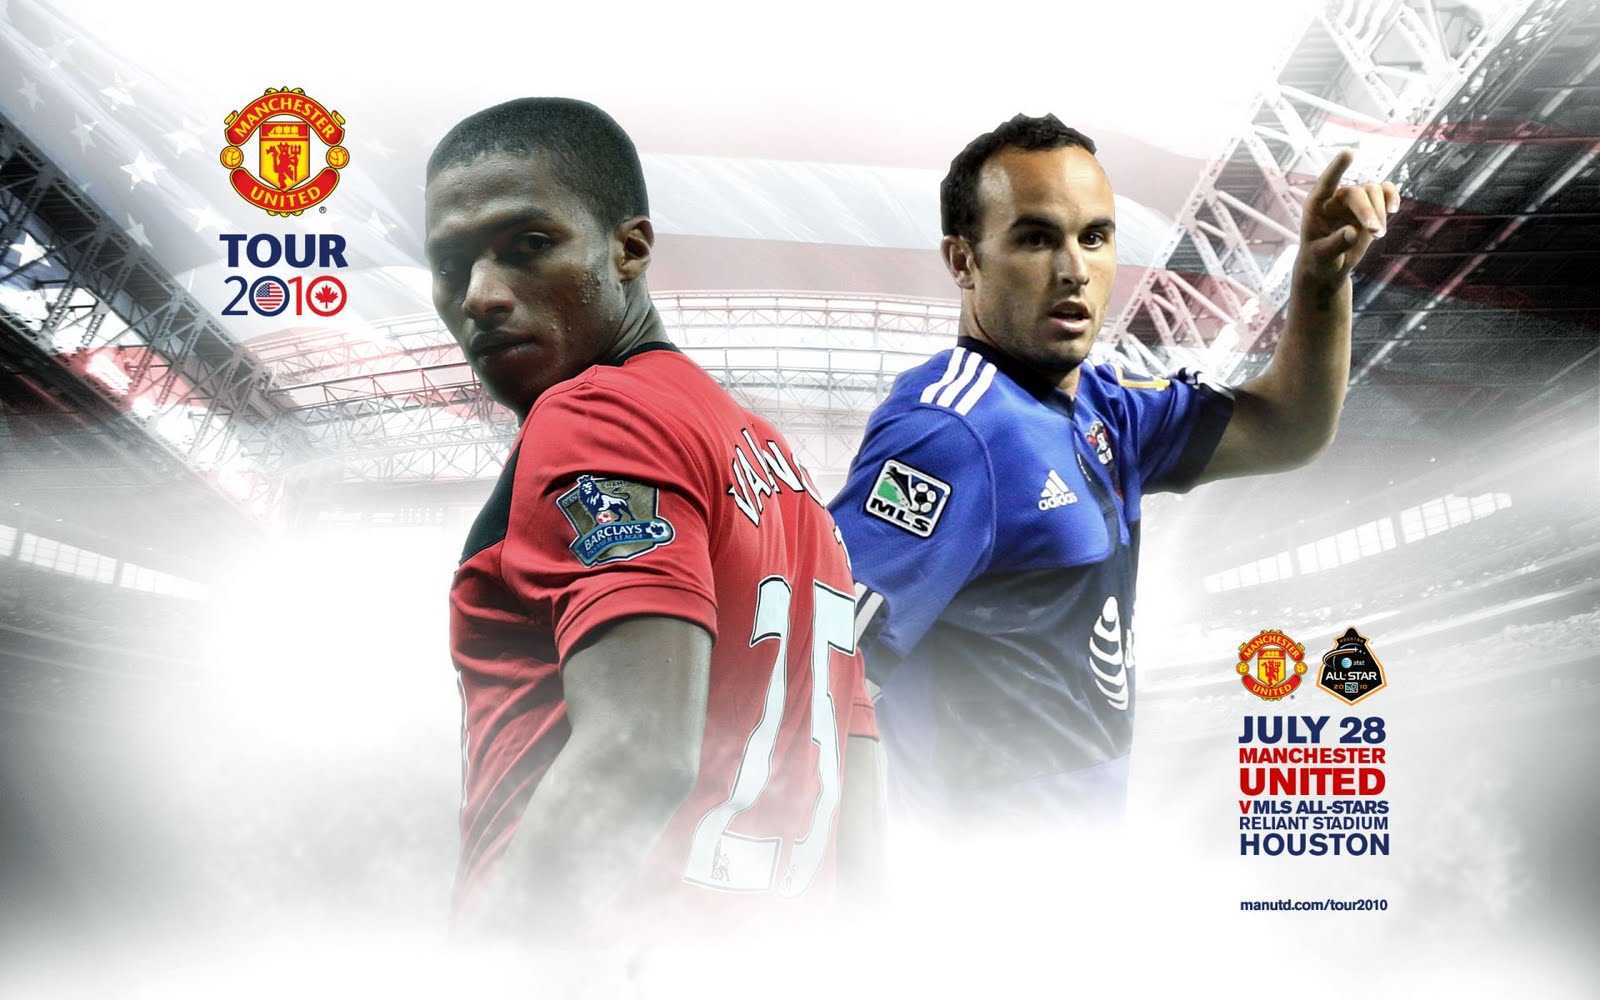 world cup,world cup 2010, South Africa, football, soccer,manchester united wallpaper Team 